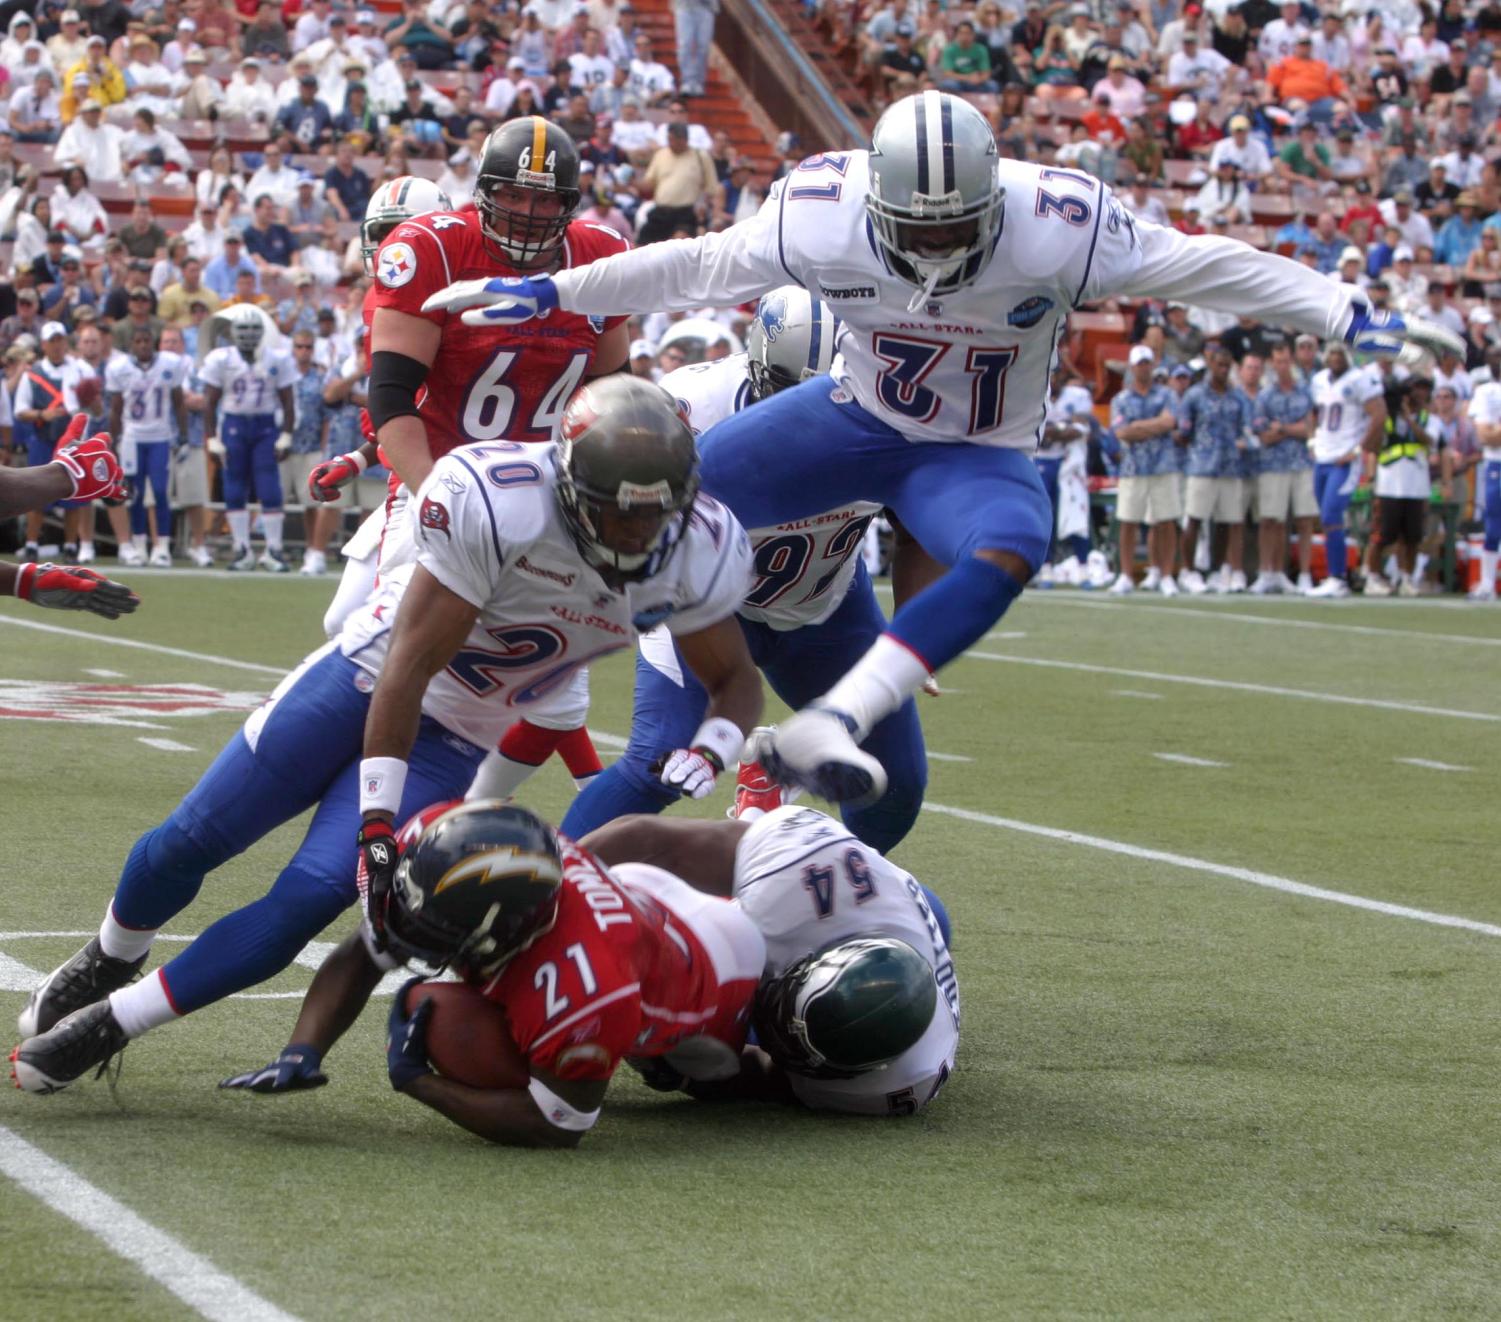 AFC and NFC all-stars playing in the 2006 Pro Bowl at Aloha Stadium in Hawaii.